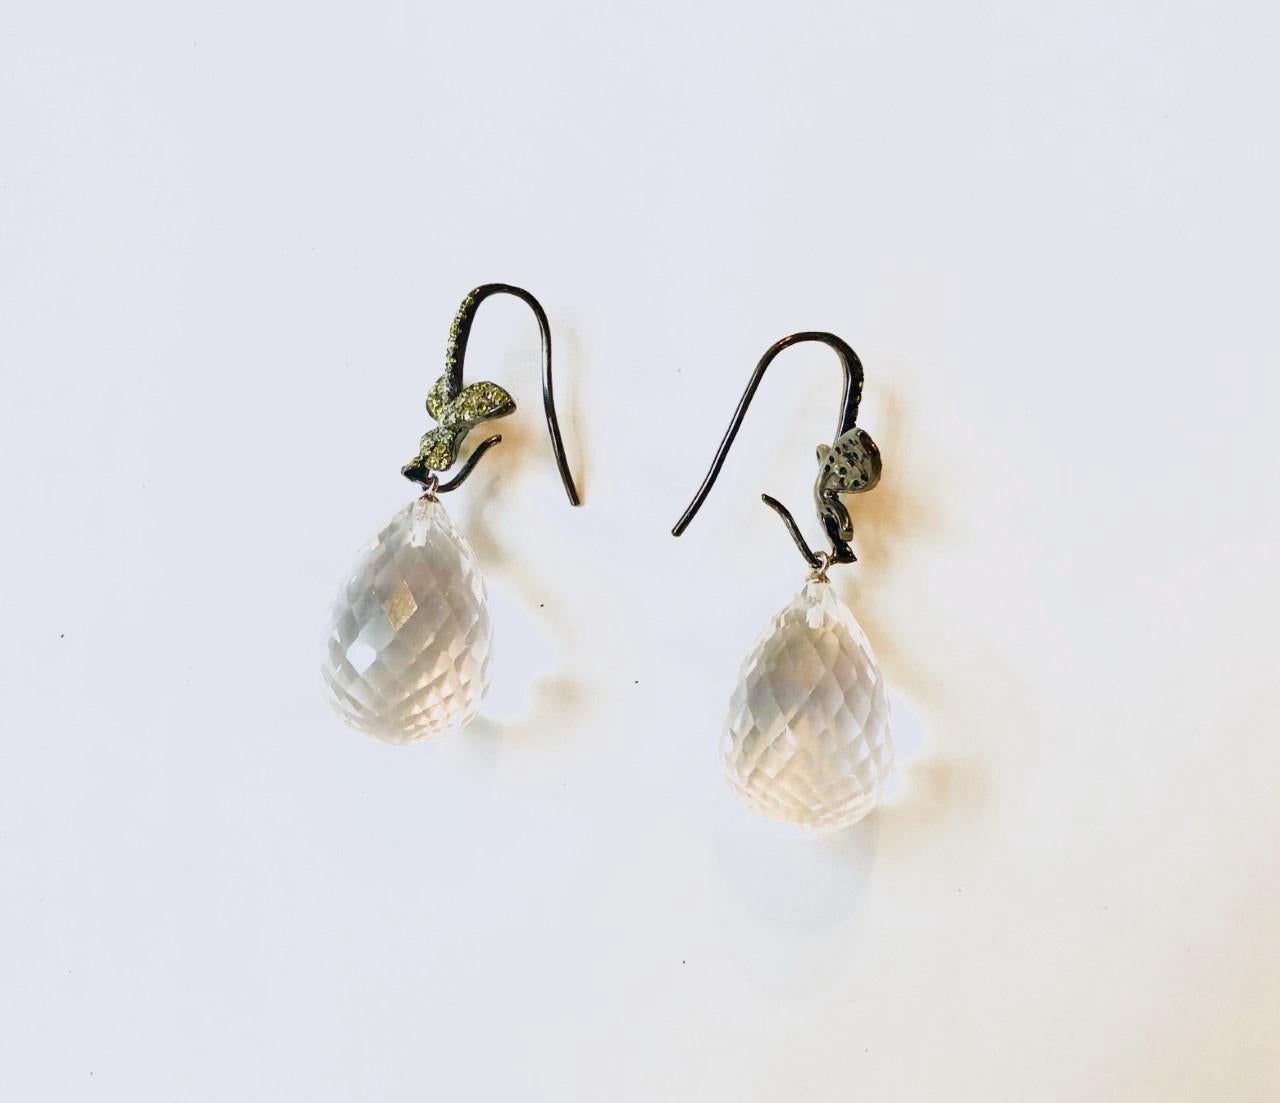 Amazing Rock Crystal or Pure Quartz featured stones dangle earrings.
These very much contemporary style pairs are made with 925 silver and zirconia.

